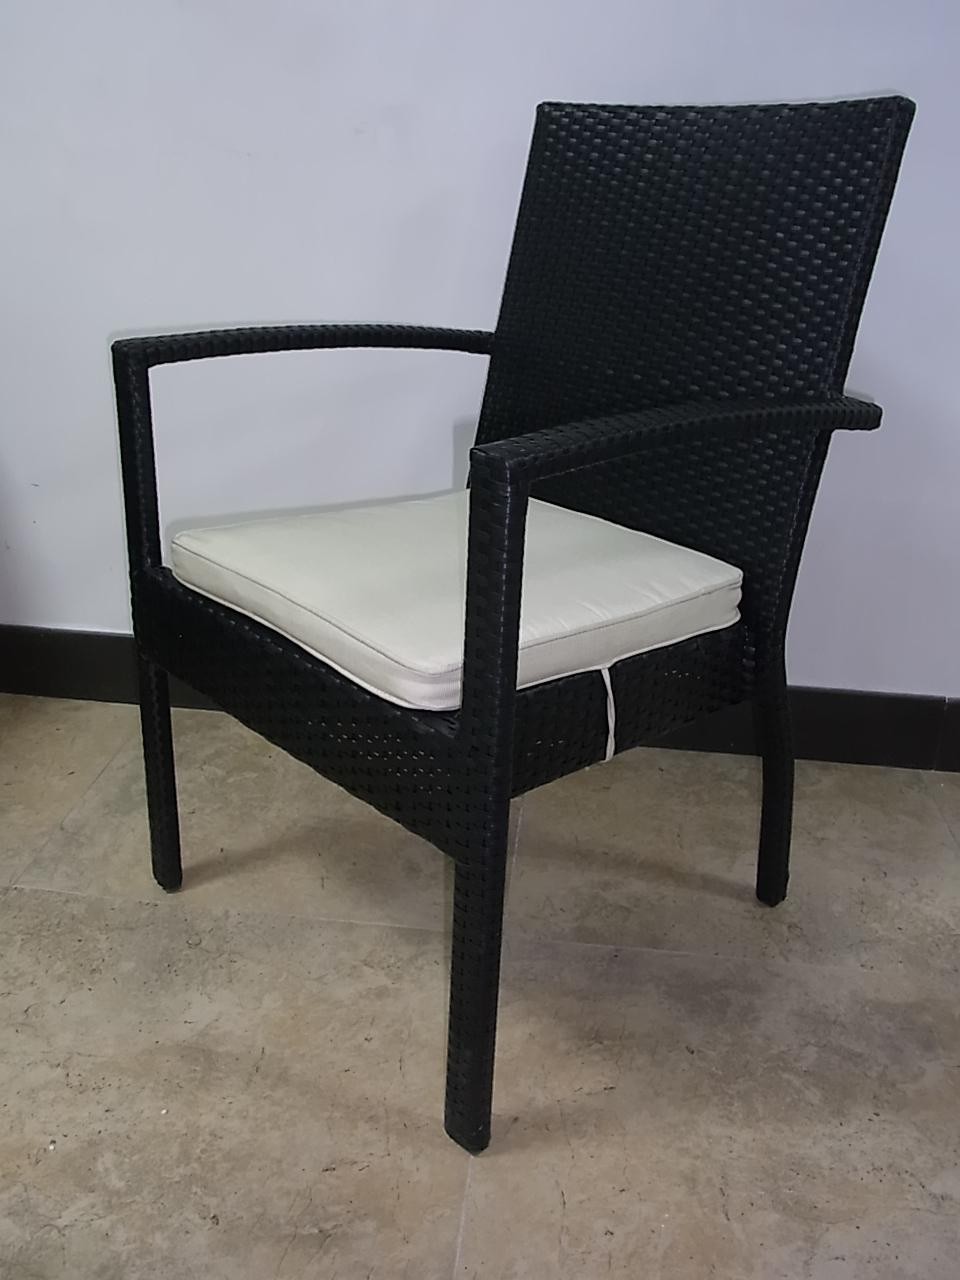 Wholesale outdoor garden beach/dinning chairs-16091 from china suppliers